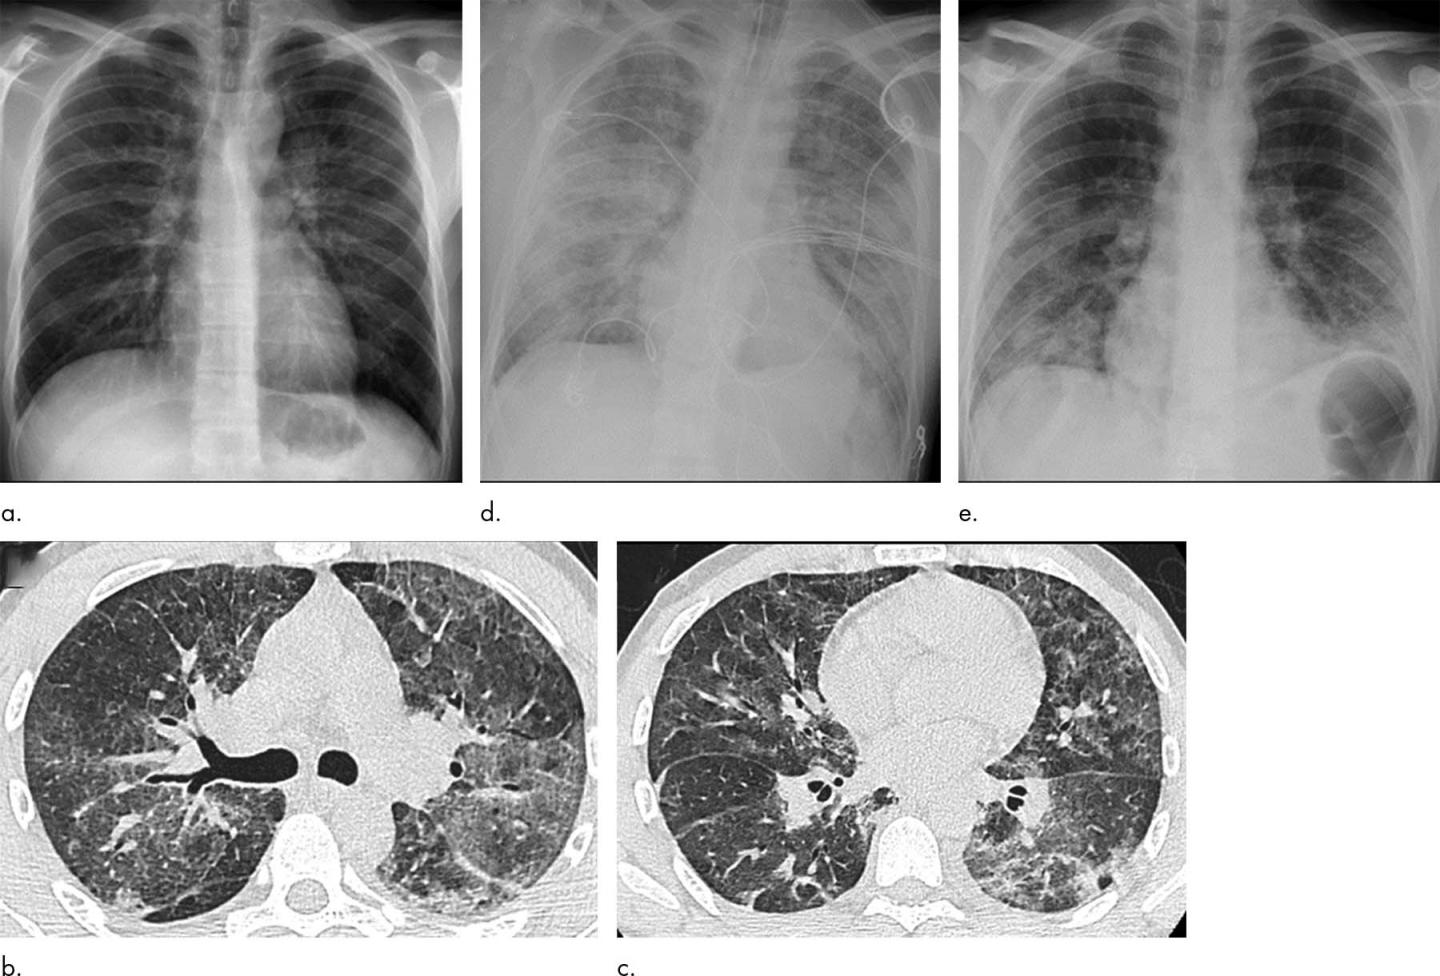 Lung Injuries from Vaping Have Characteristic Patterns on CT